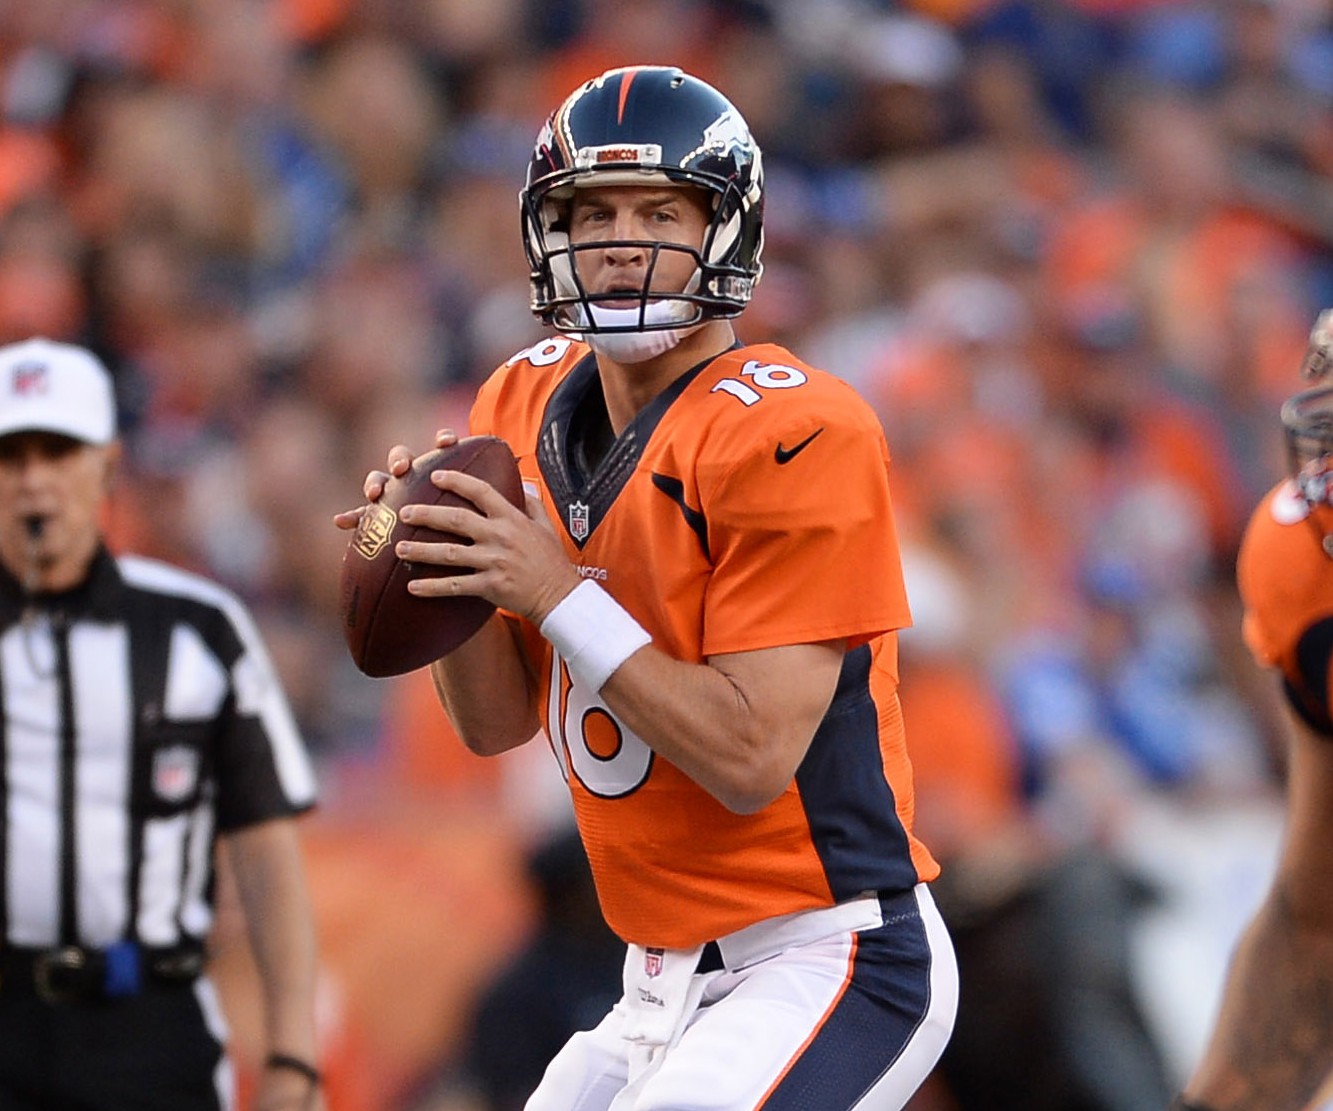 Peyton manning still has plenty of options at his disposal without Wes Welker. Ron Chenoy, USA TODAY Sports)